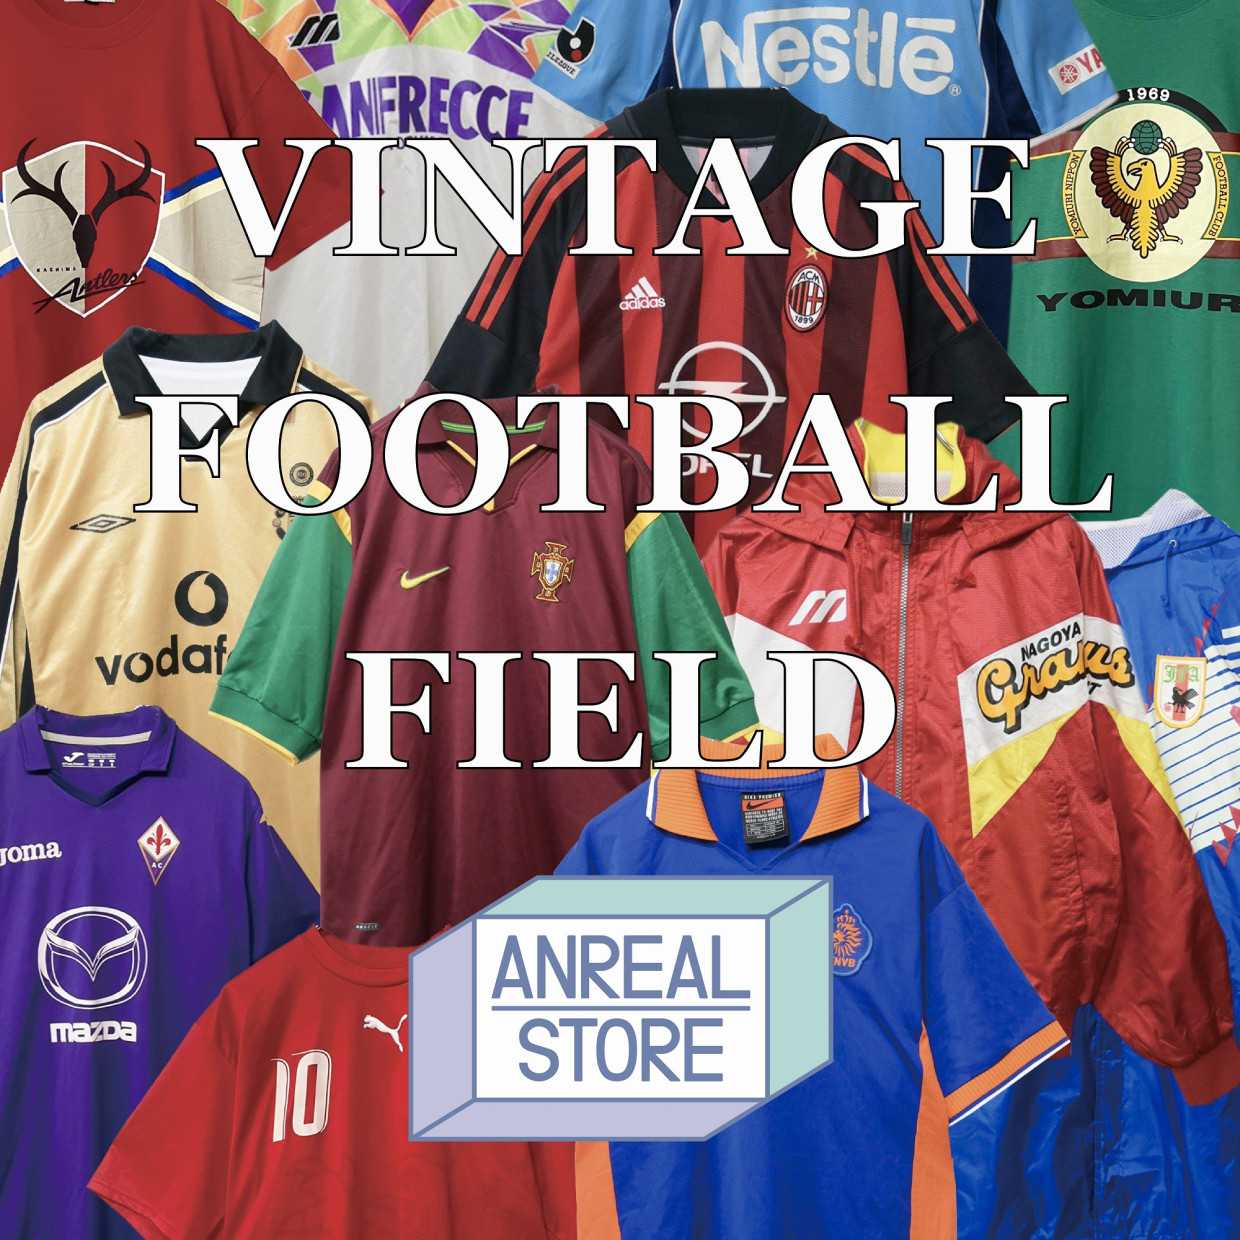 ANREAL STORE